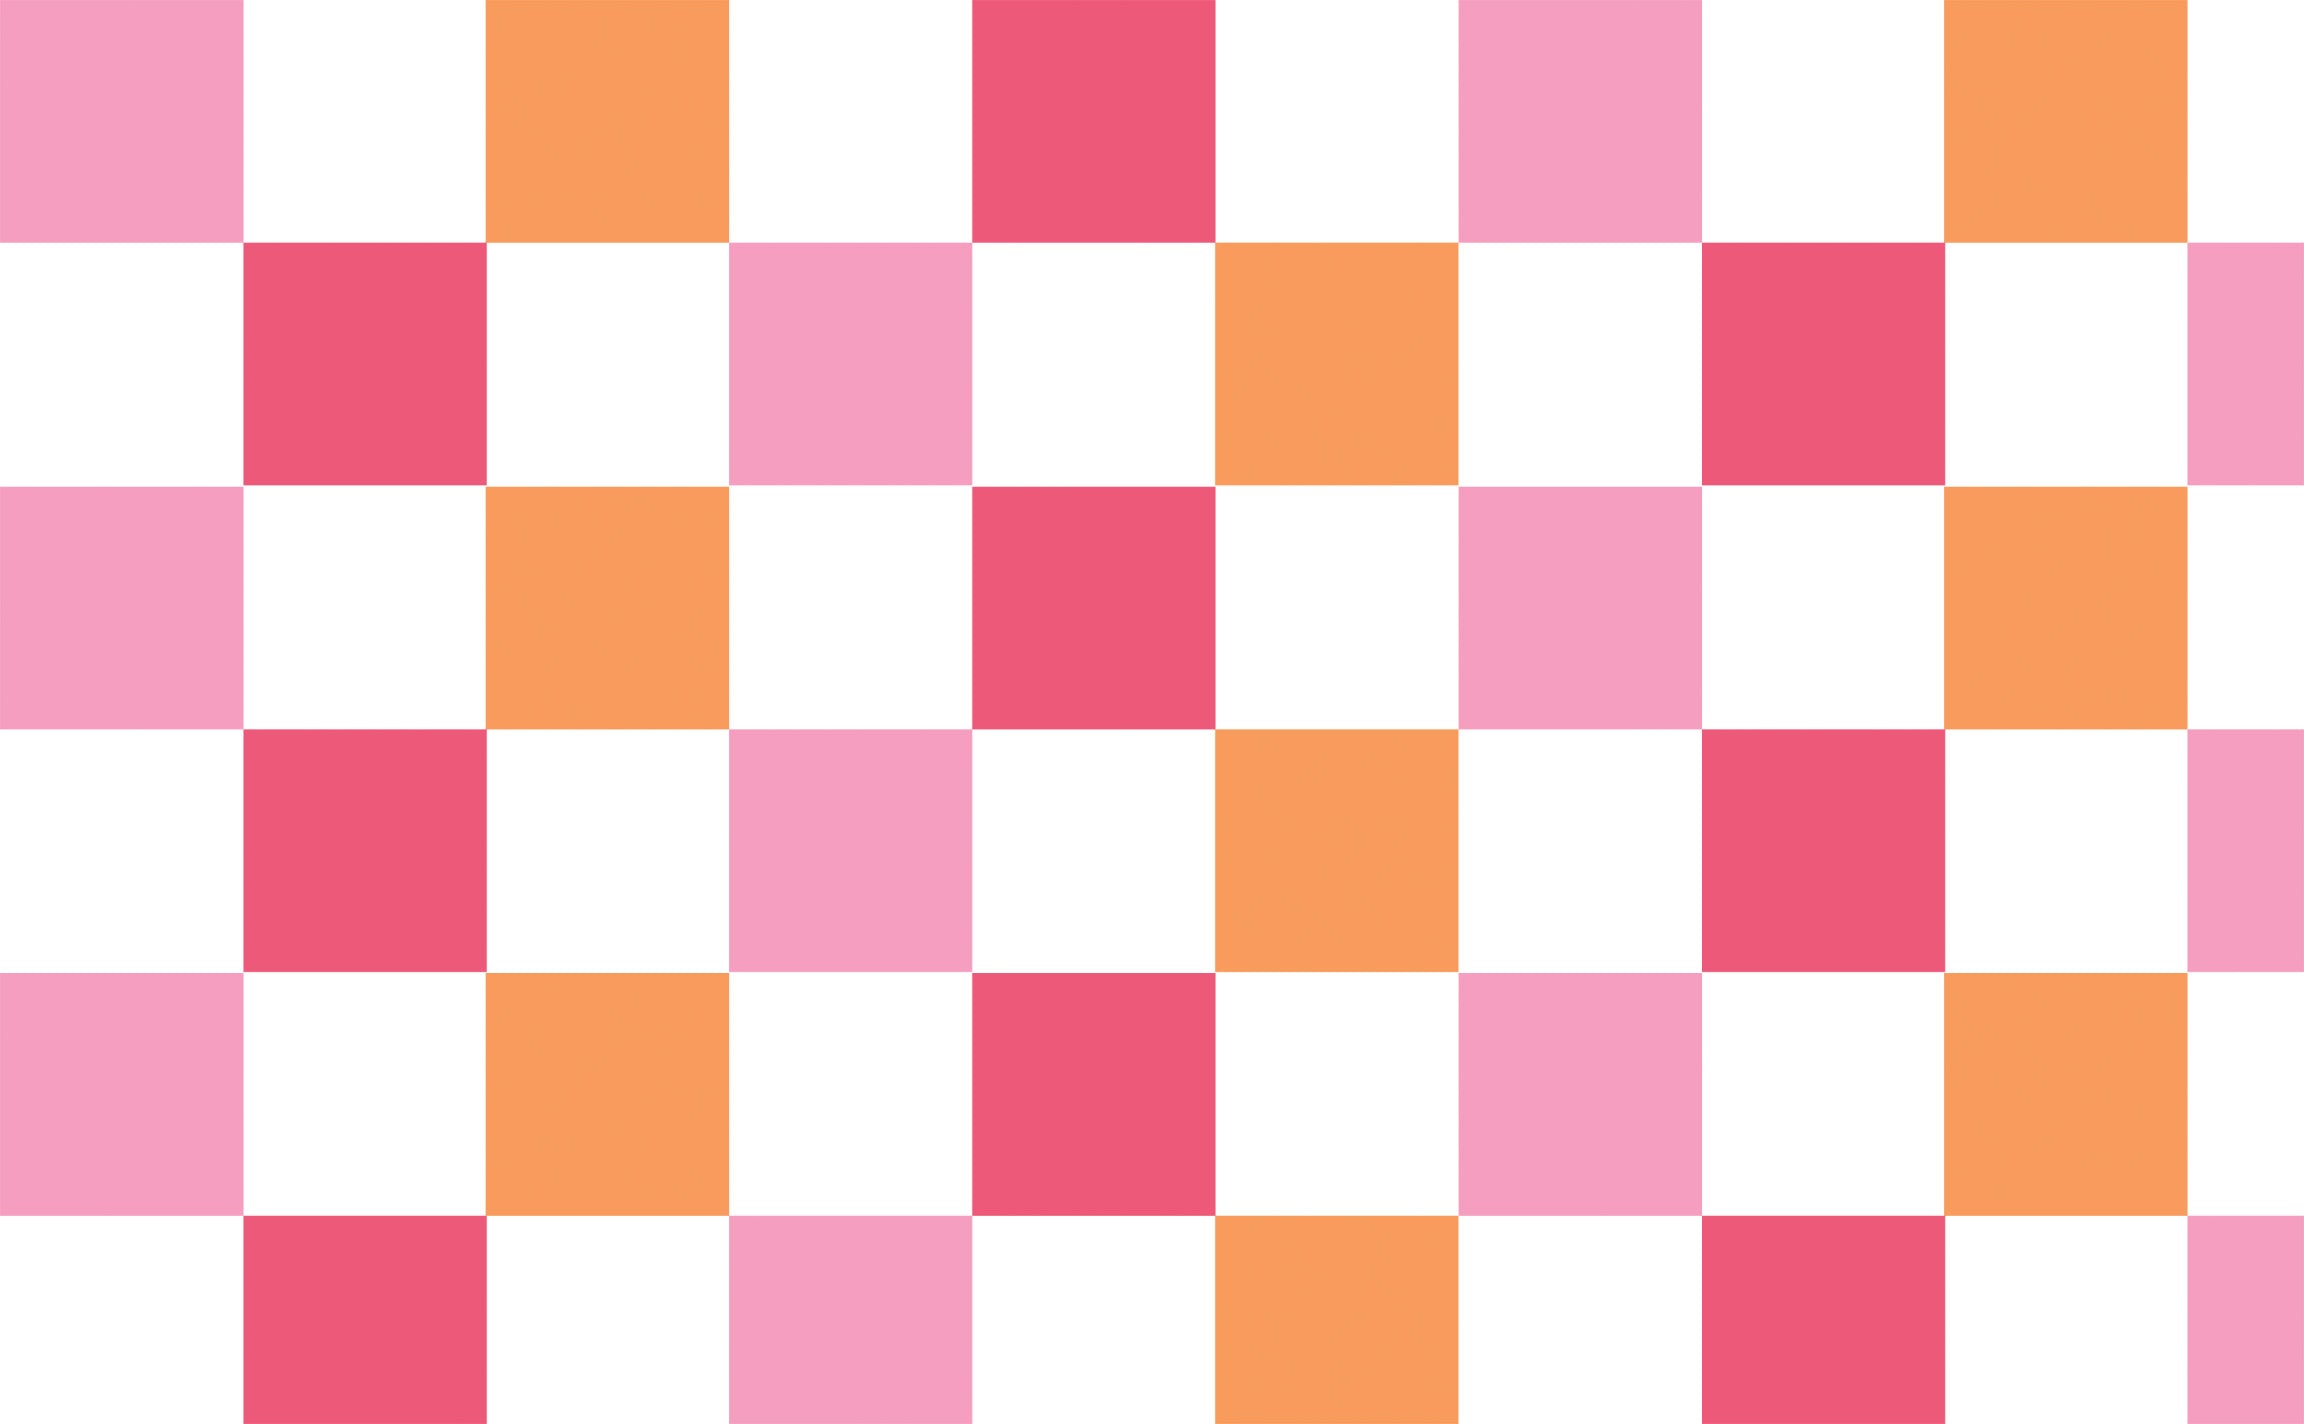 The Checkerboard Pattern Is Here to Stay